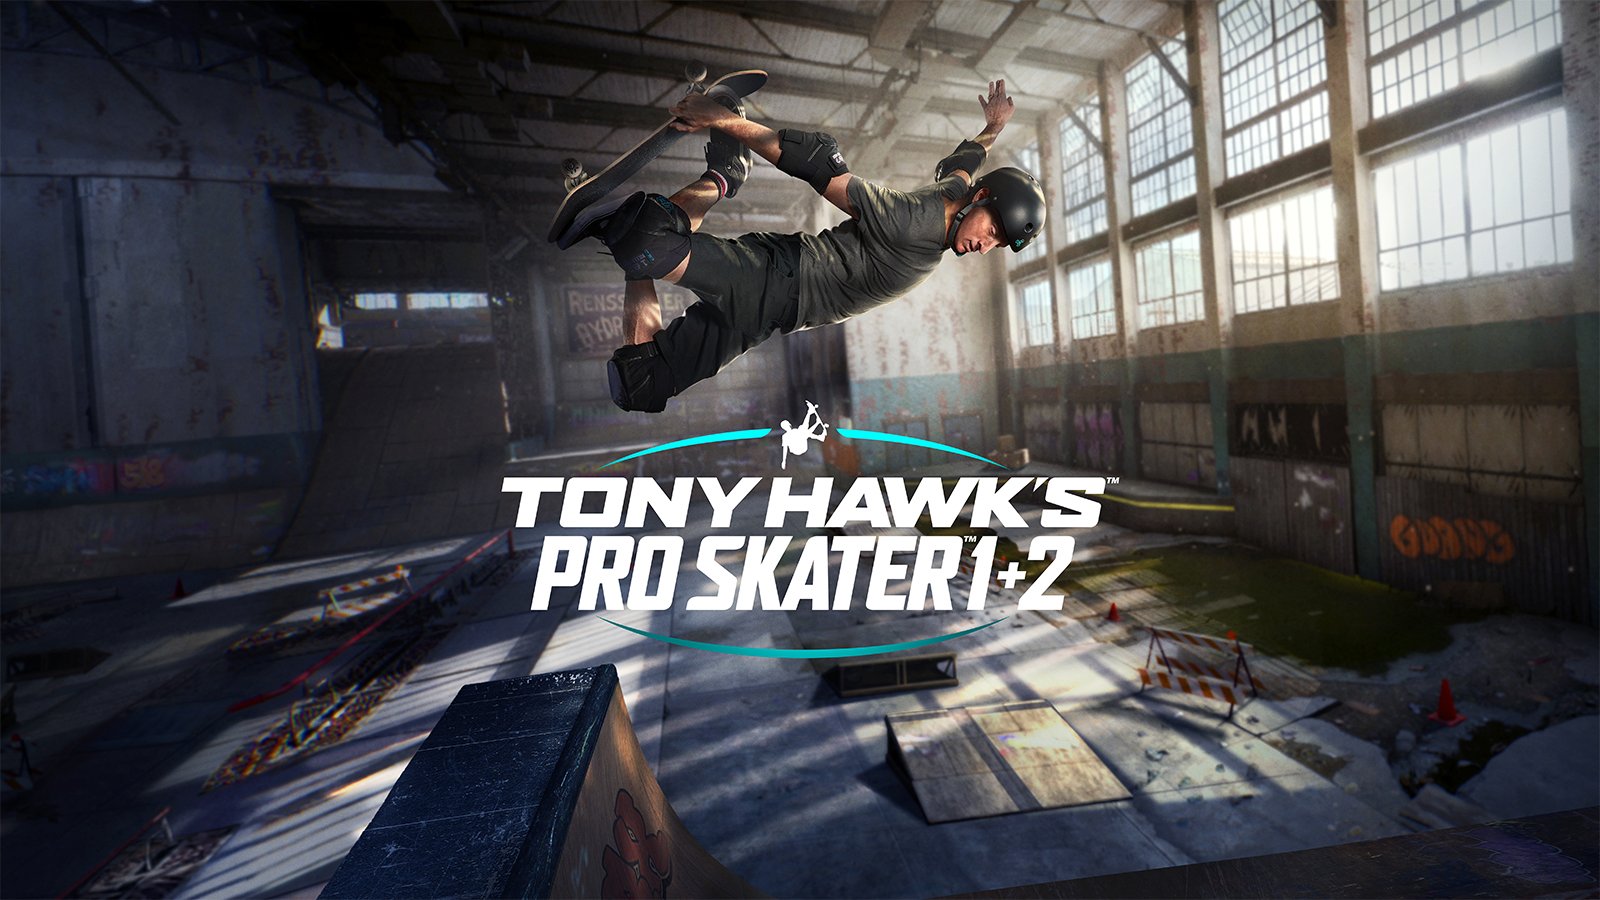 PlayStation Plus Monthly Games for August: Yakuza: Like A Dragon, Tony  Hawk's Pro Skater 1+2, Little Nightmares : r/Games